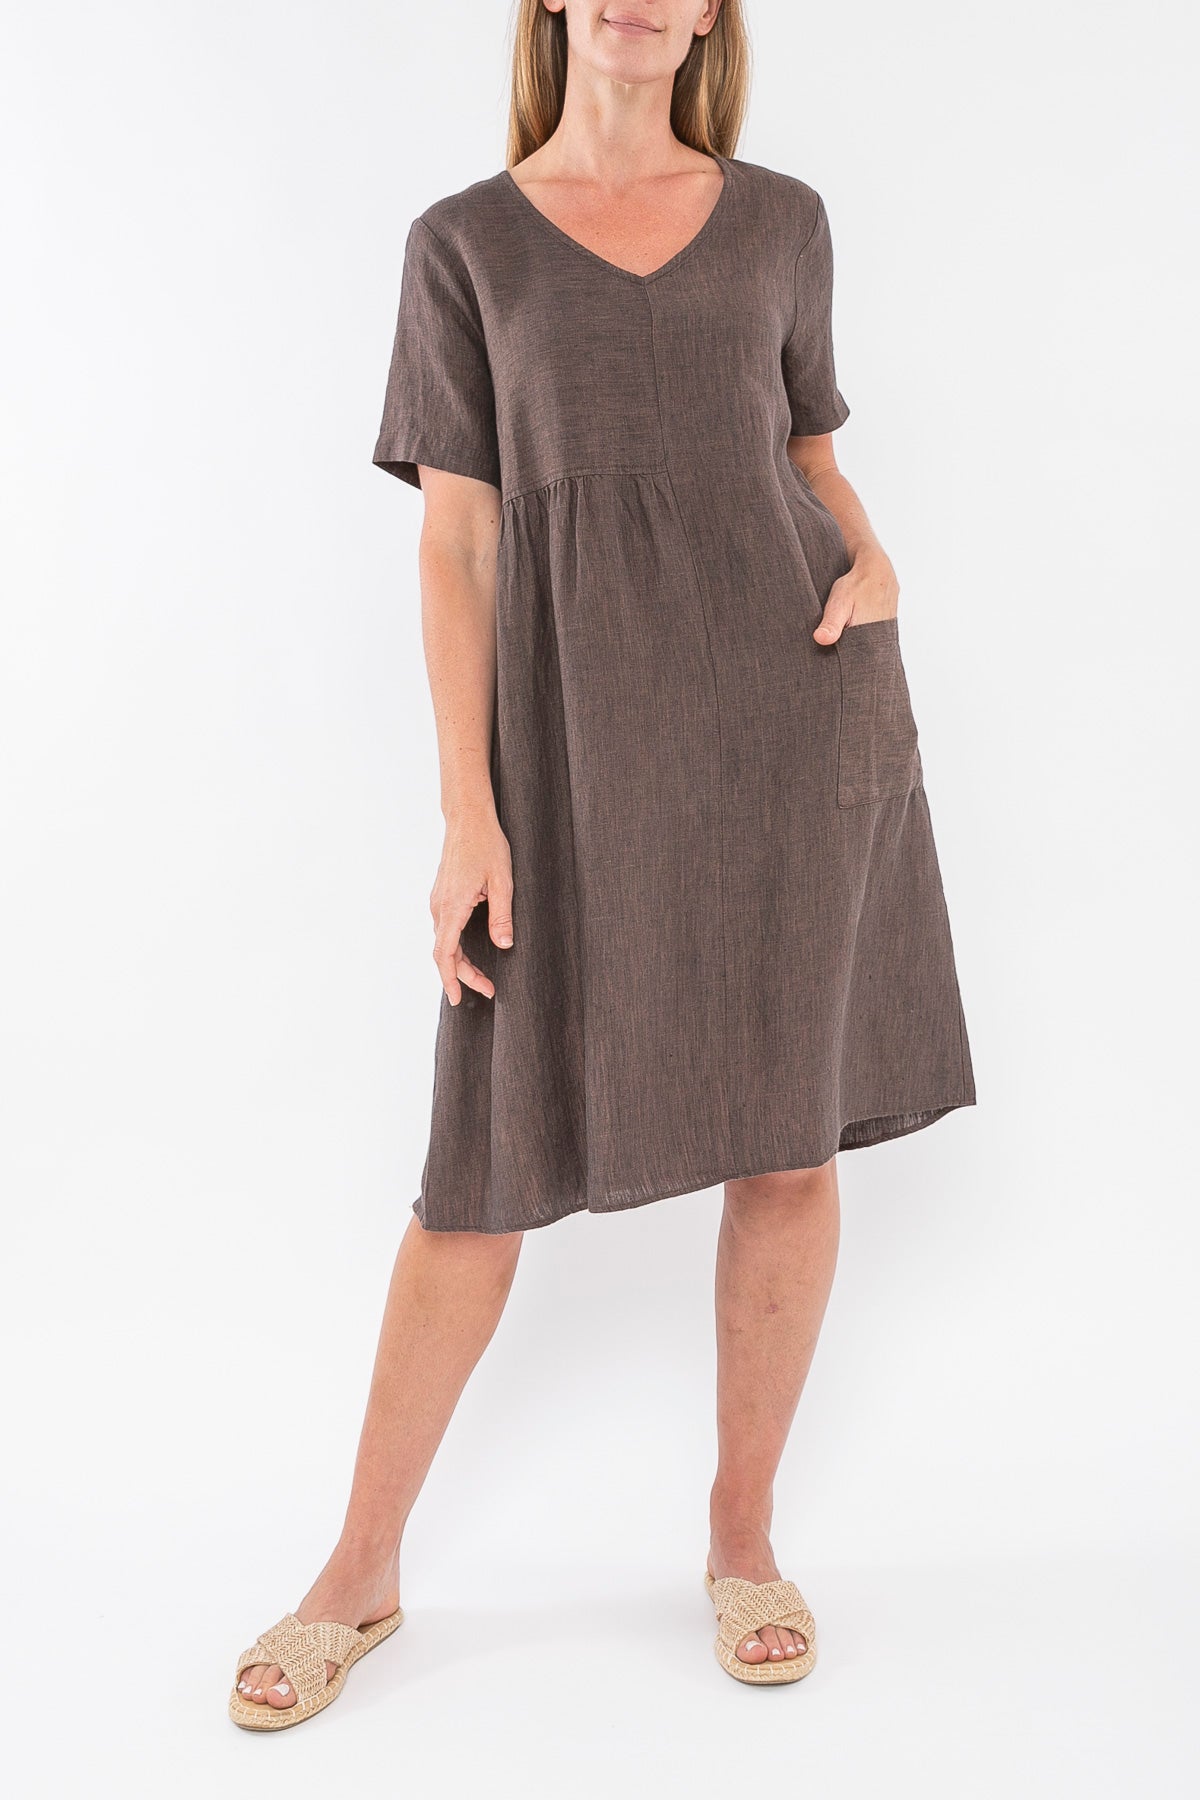 Jump - Panelled Linen Dress in Chocolate | J5002A